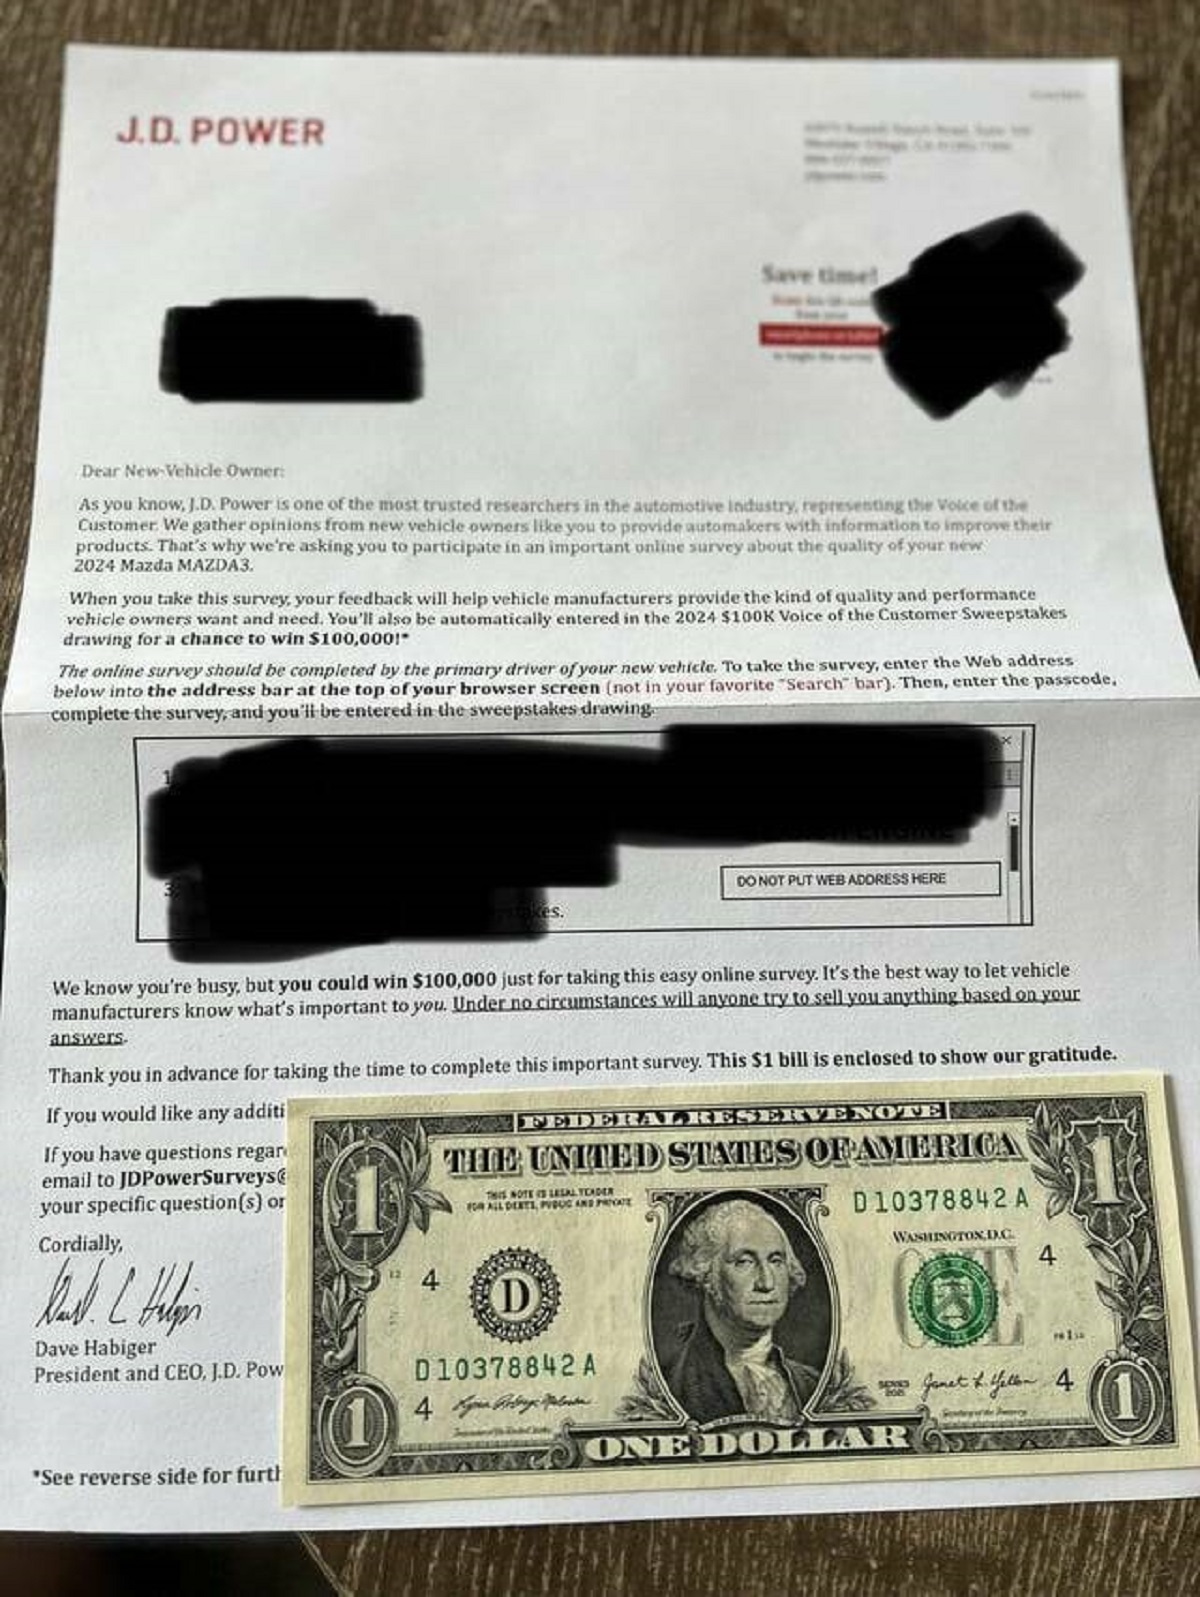 "JD Power sent me $1 to take a survey on my new car"